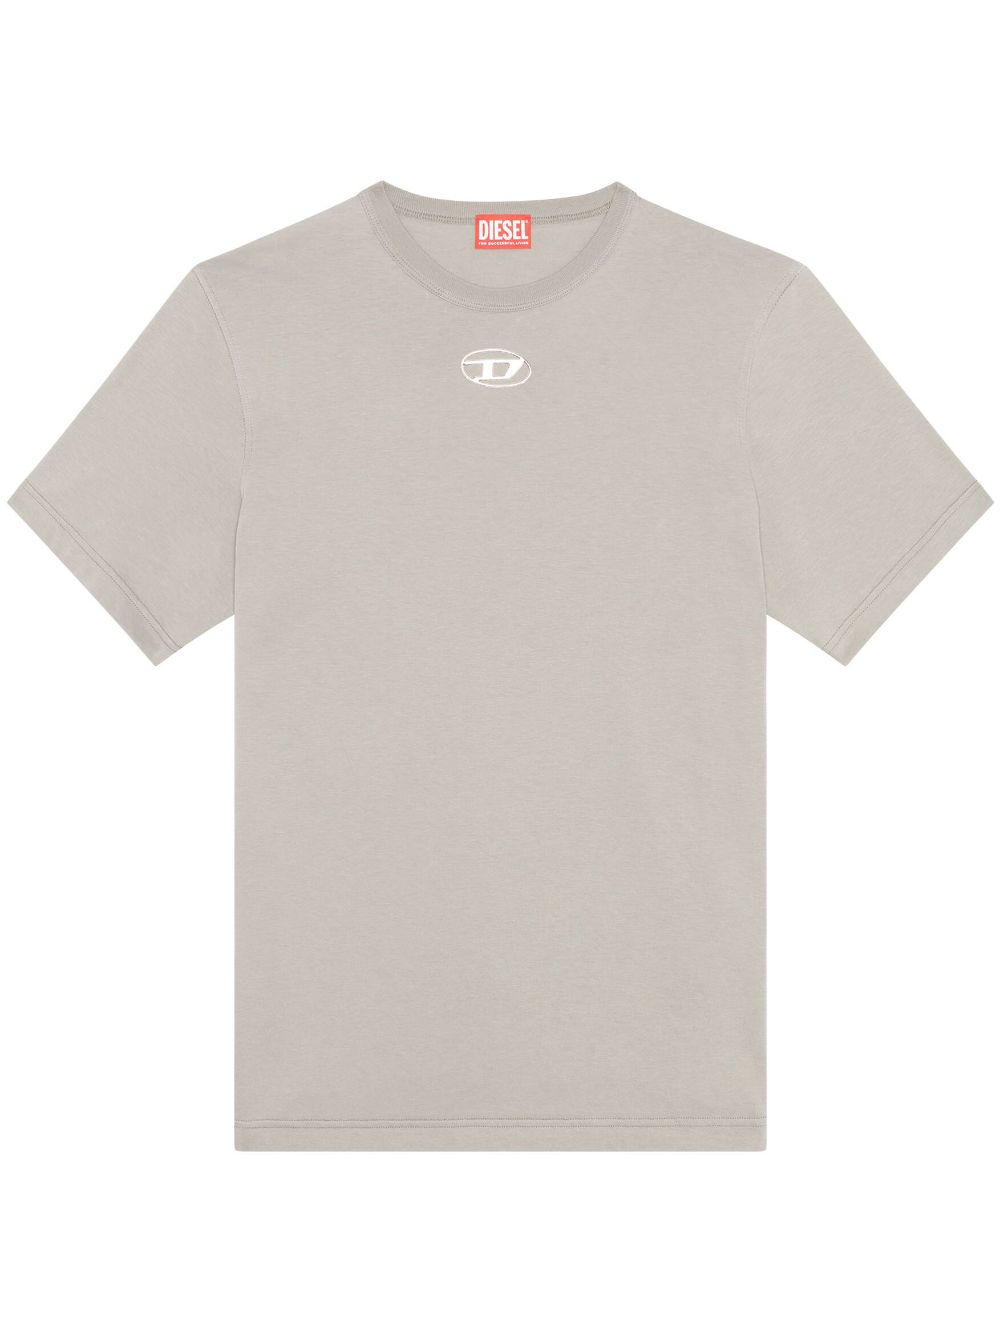 Diesel T-shirt With Injection Moulded Logo In Grey